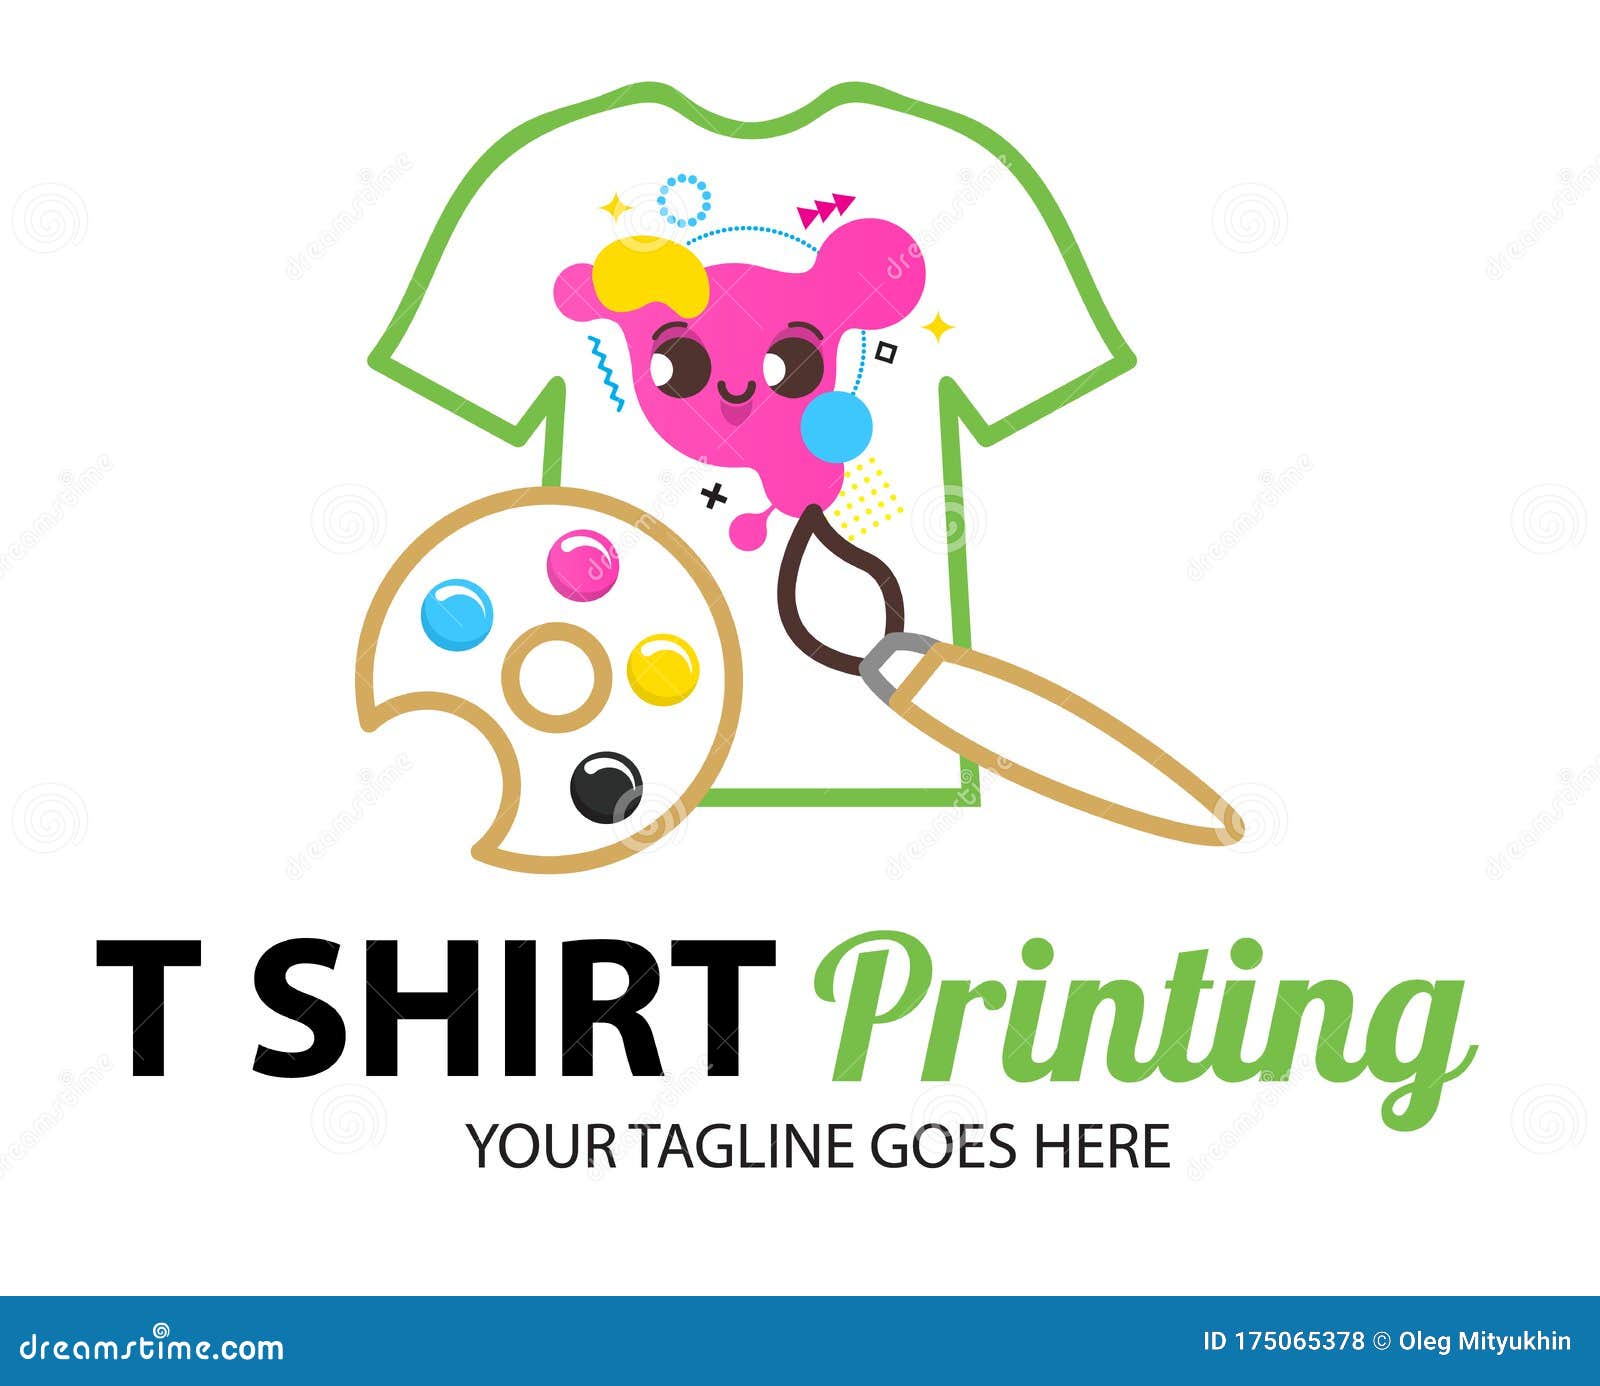 Tshirt Printing Cmyk Palette Concept. Abstract Modern Colored Vector Logo  Template Of T-Shirt Printing Stock Vector - Illustration Of Business,  Print: 175065378